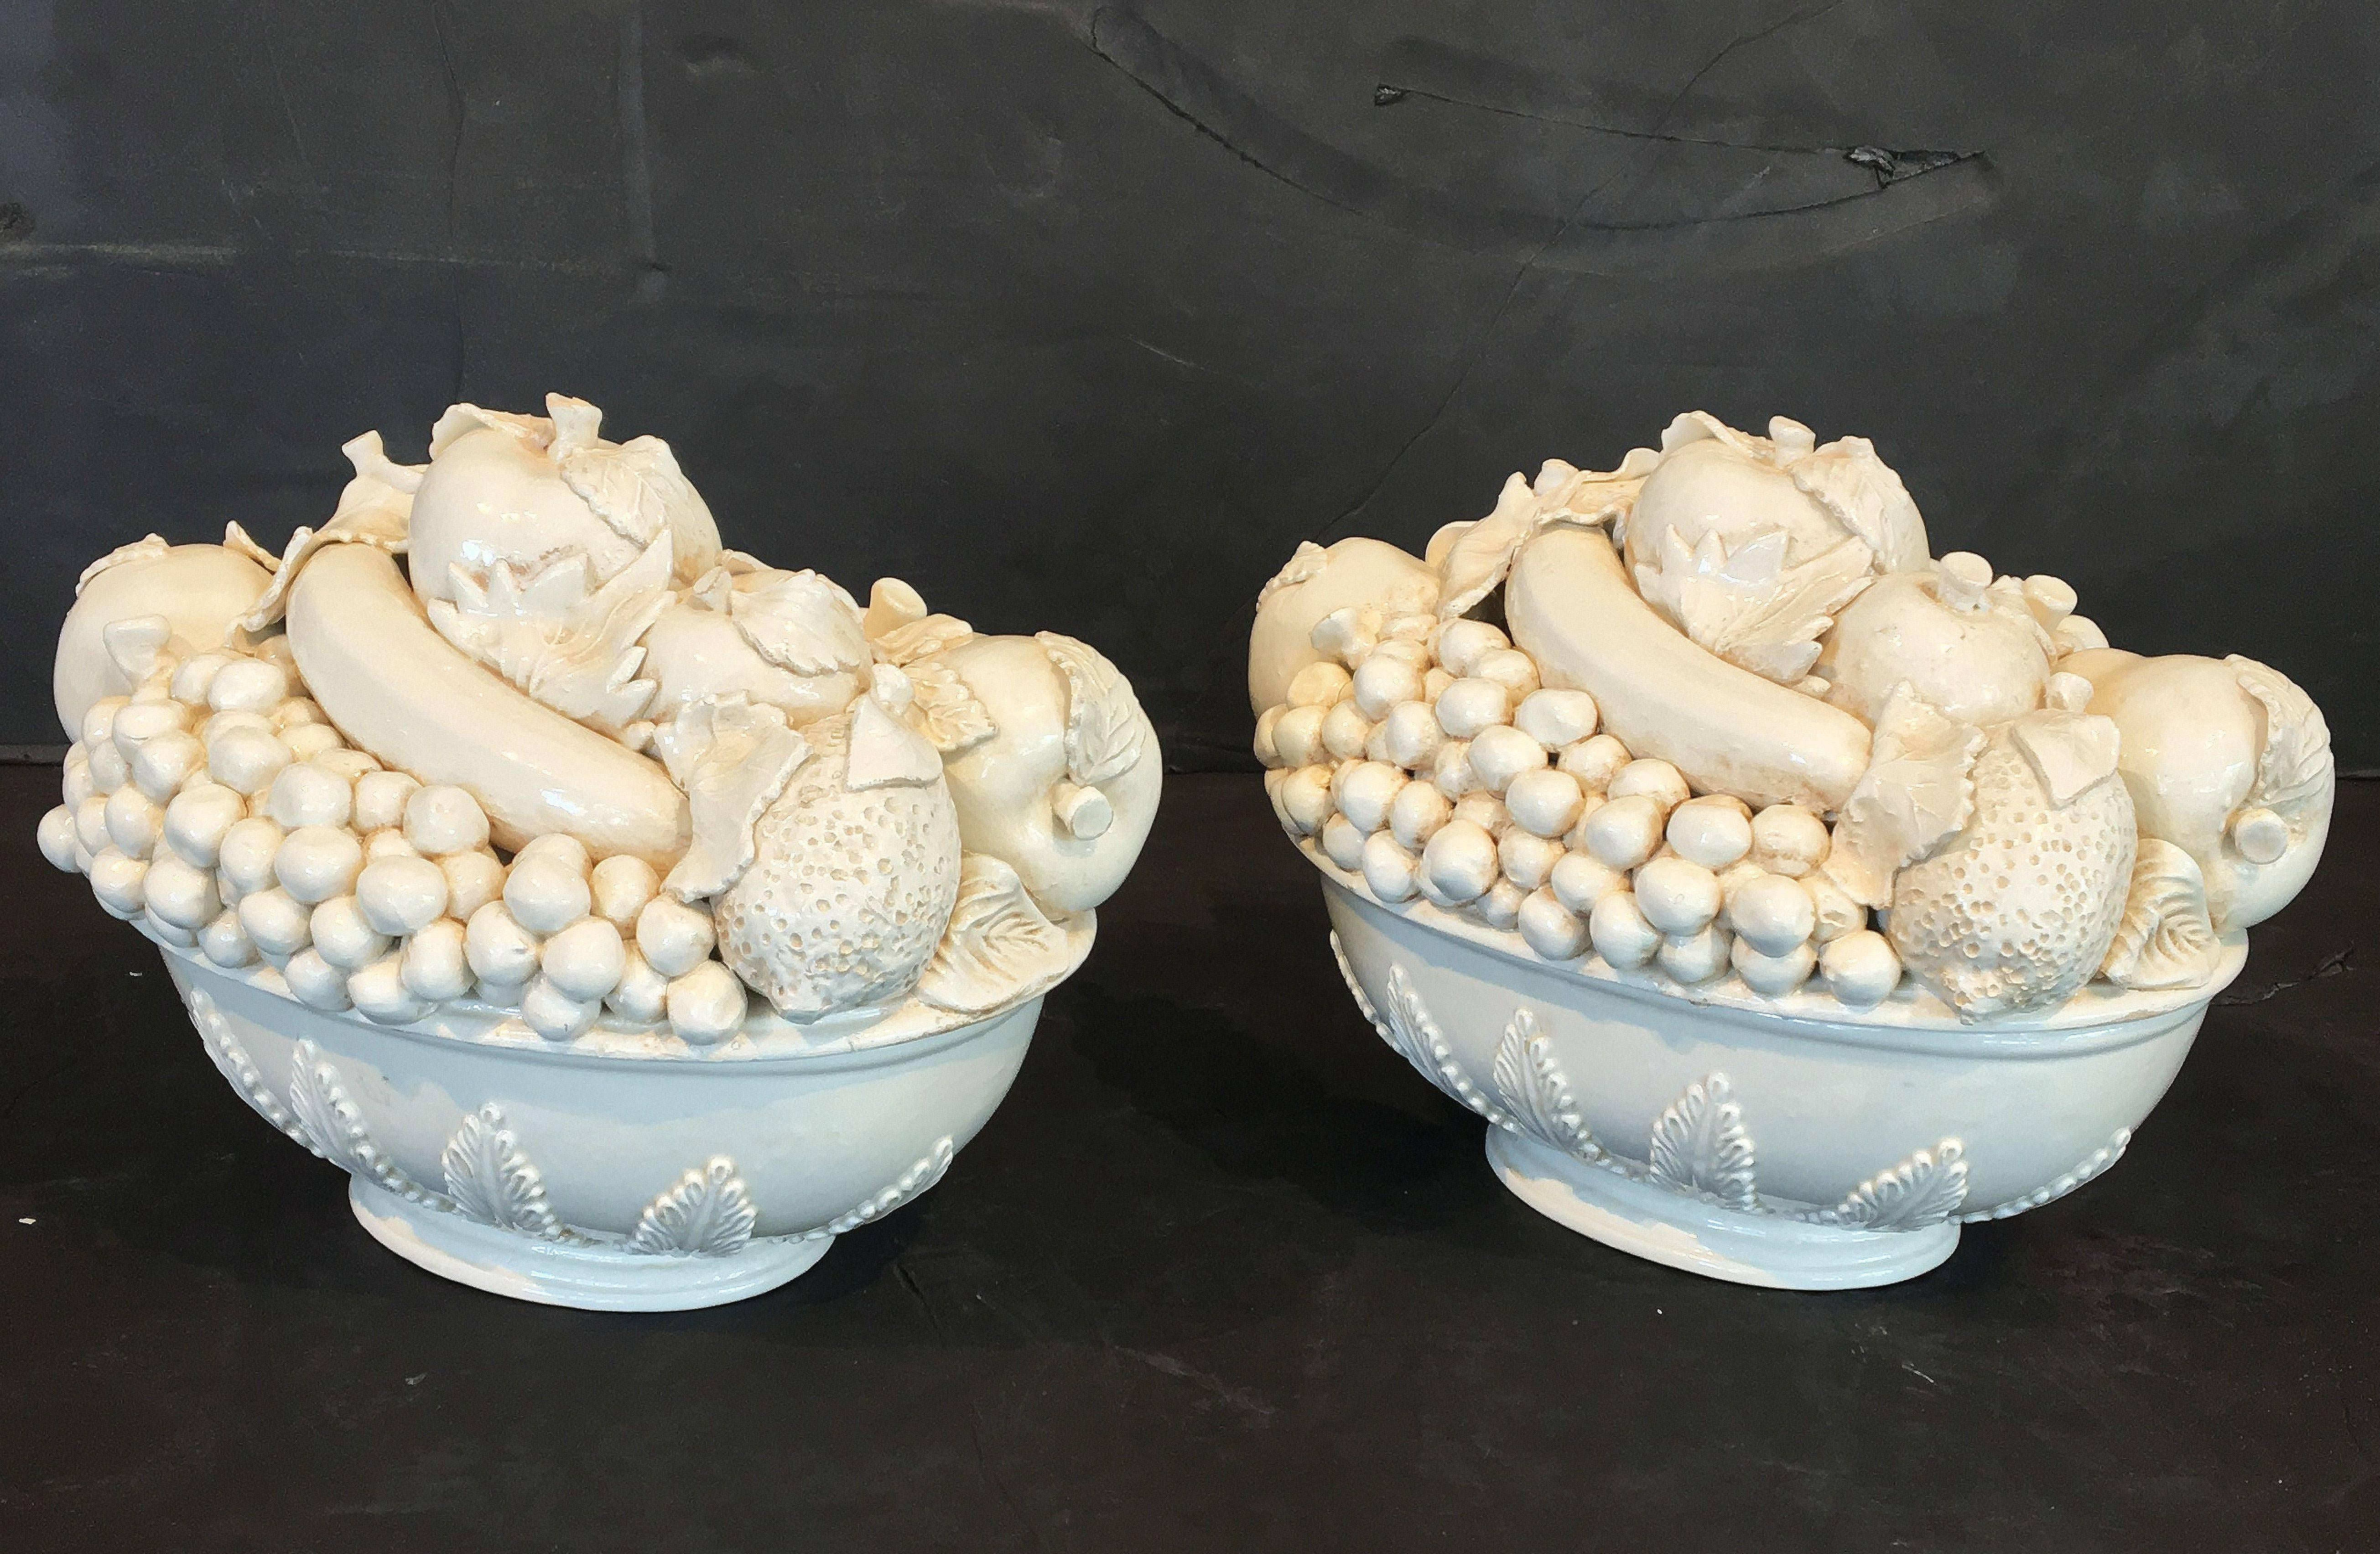 A fine pair of Italian creamware or white glazed oval ceramic bowls of fruit, each featuring a fitted lid with a relief of fruit including apples, grapes, and pomegranates over an oval raised pedestal bowl base. 

Great for serving or for use as a